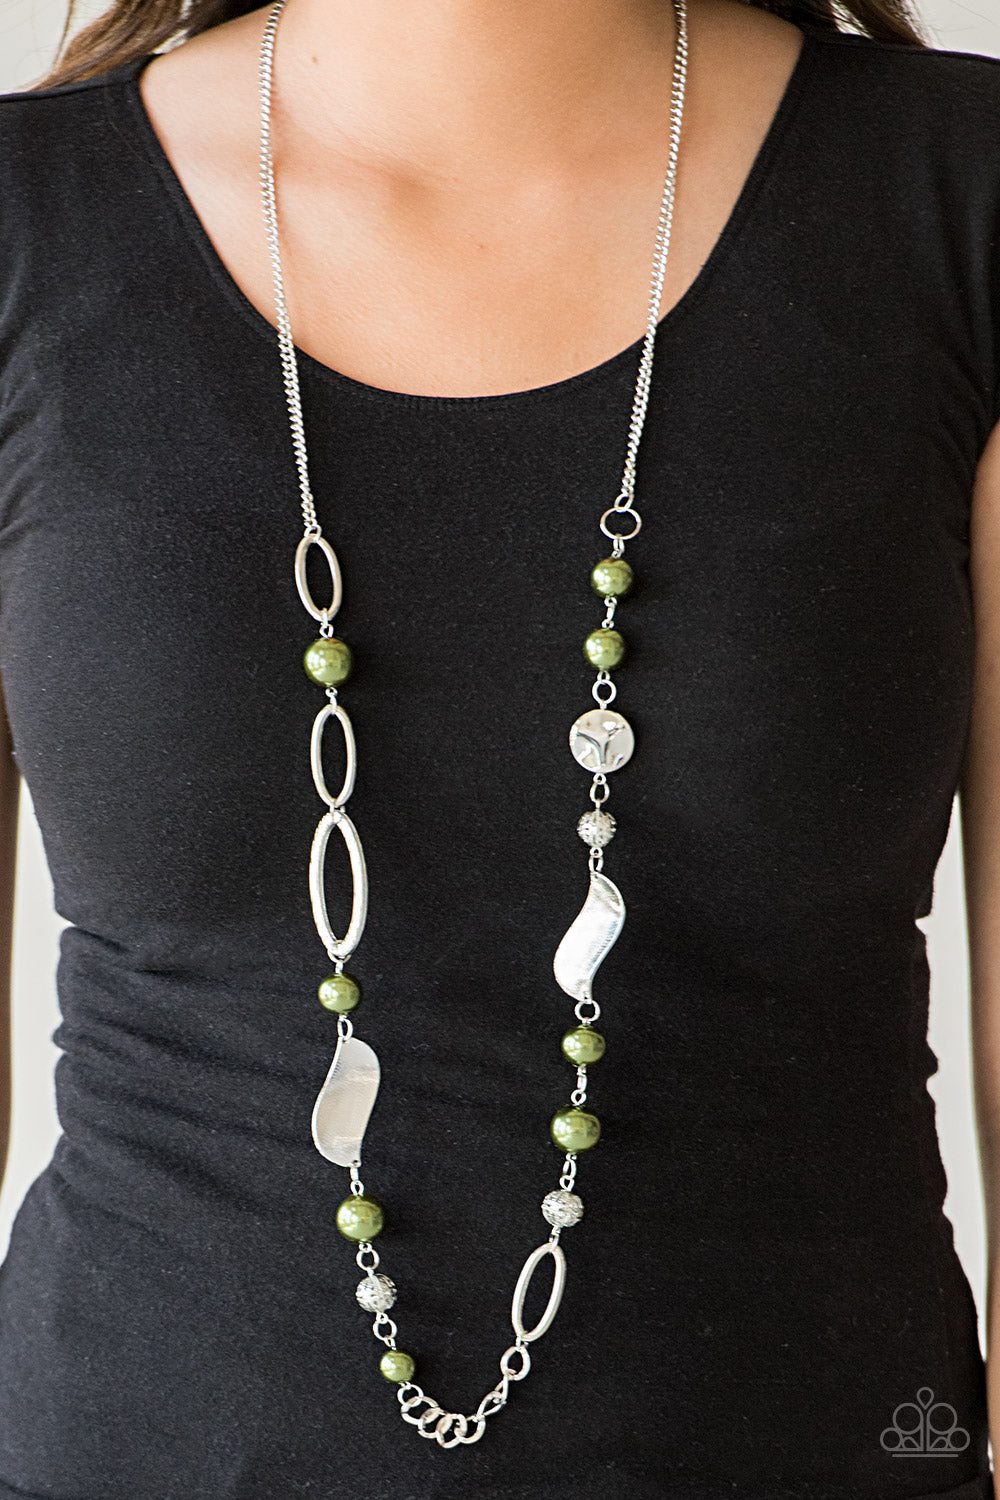 Paparazzi All About Me - Green Pearls - Silver Necklace & Earrings - $5 Jewelry With Ashley Swint